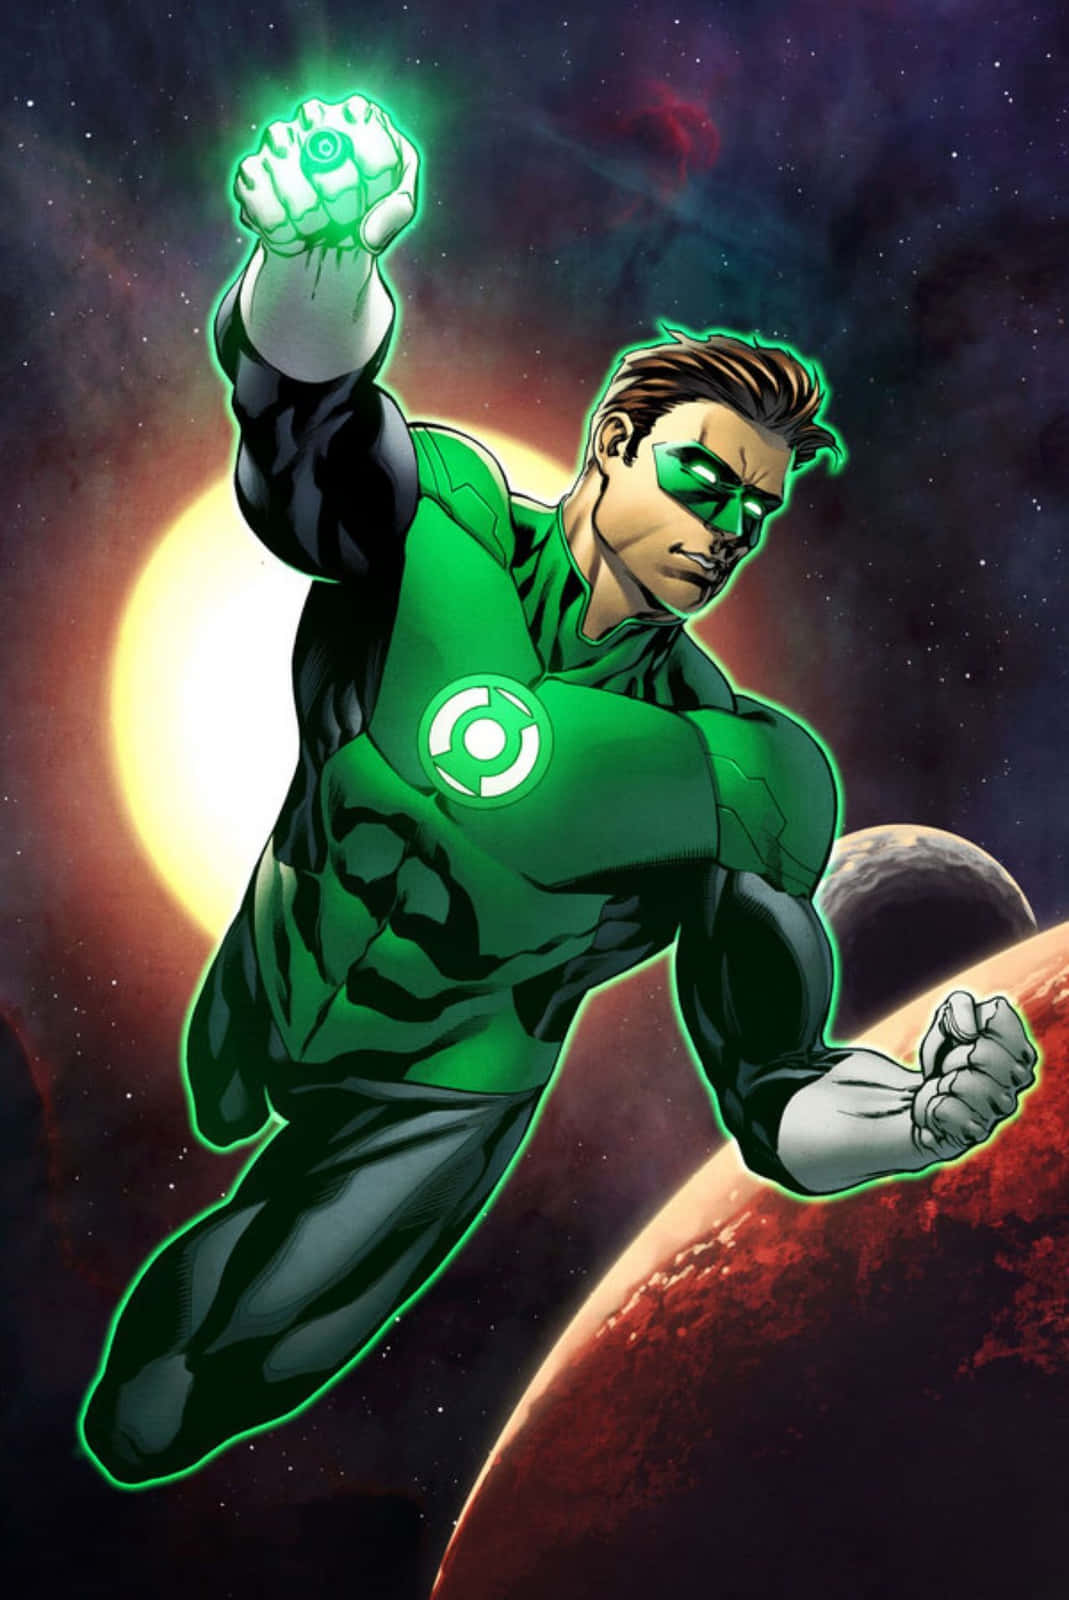 A Stark and Colourful Image of the Green Lantern Symbol